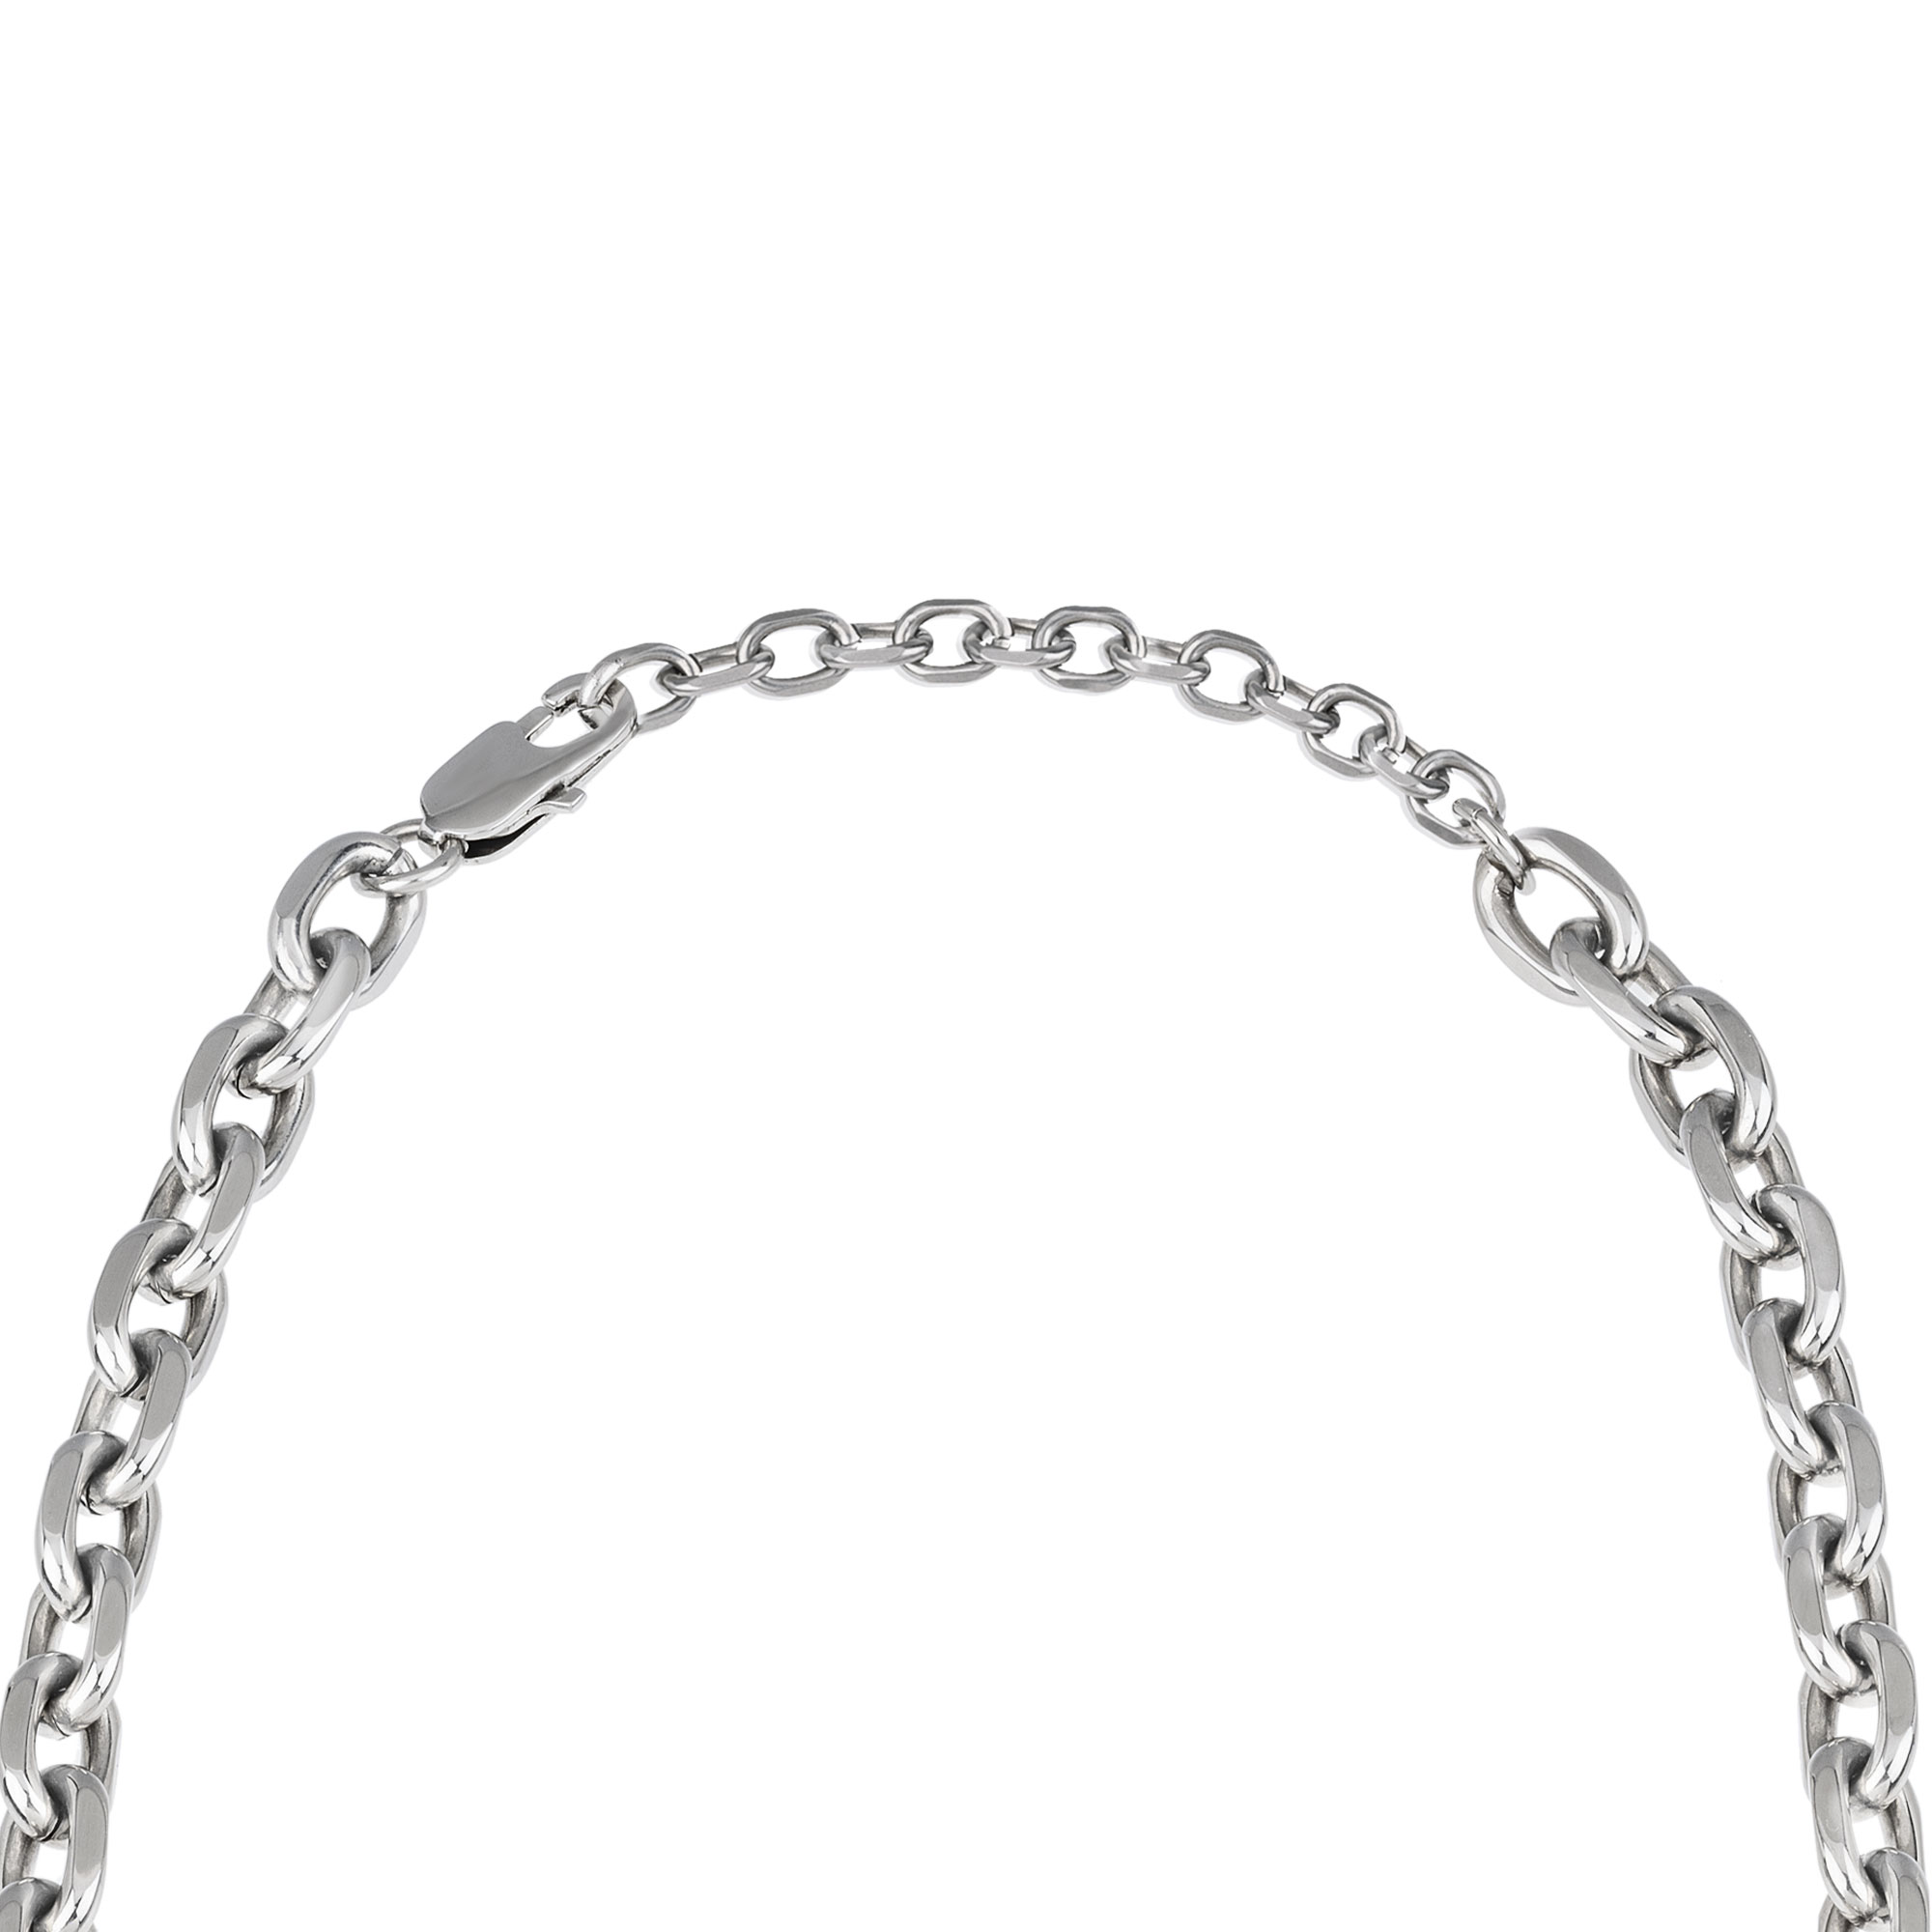 PROMISE - STAINLESS STEEL NECKLACE - 2 - TJ3078 | Breil